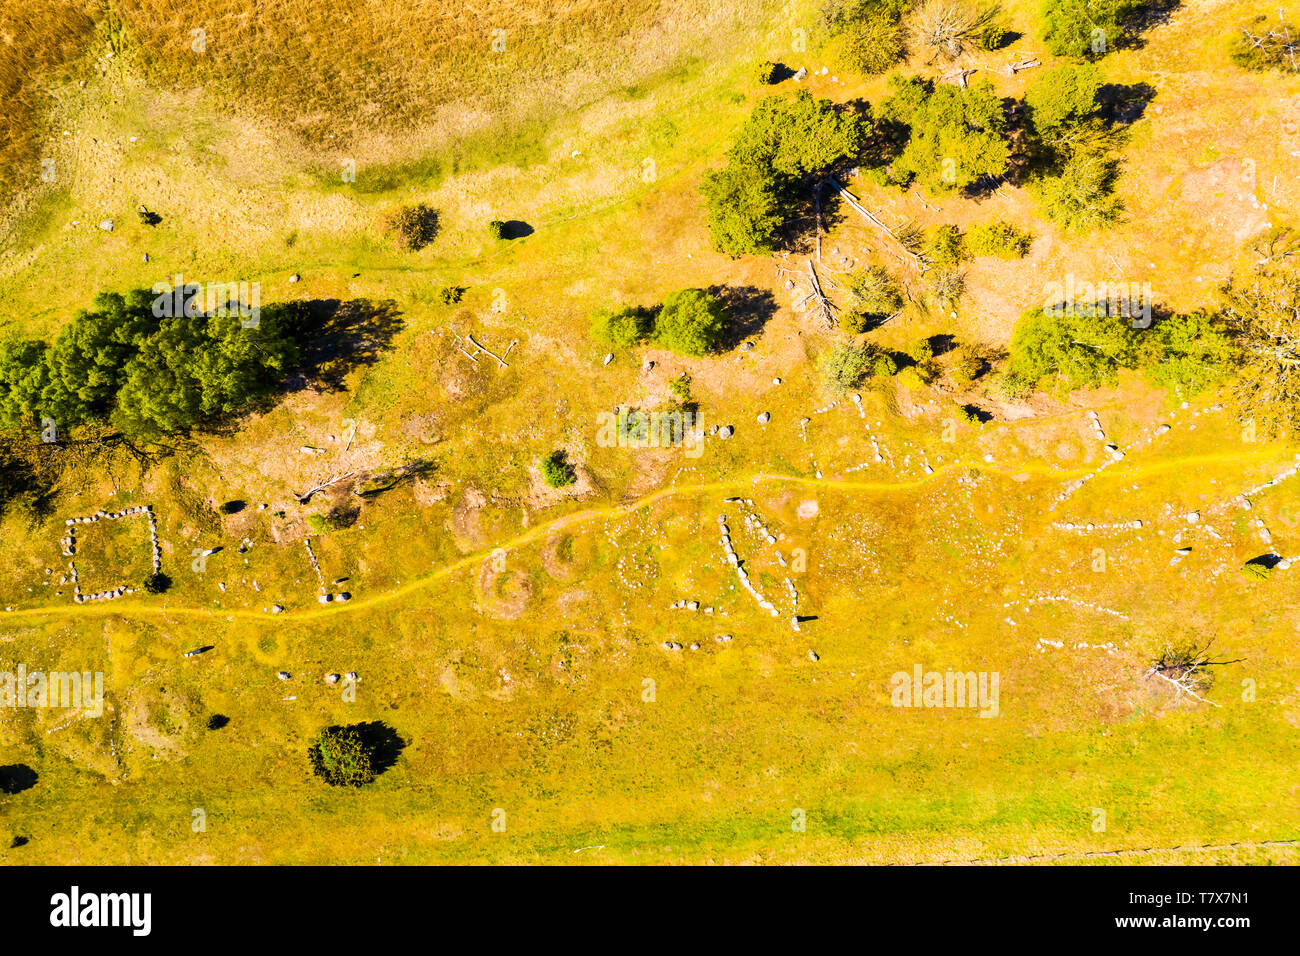 Top down view of the prehistoric grave field at Hjortahammar in Blekinge, Sweden. Mounds, stone ships and other formations visible on the ground. Hiki Stock Photo